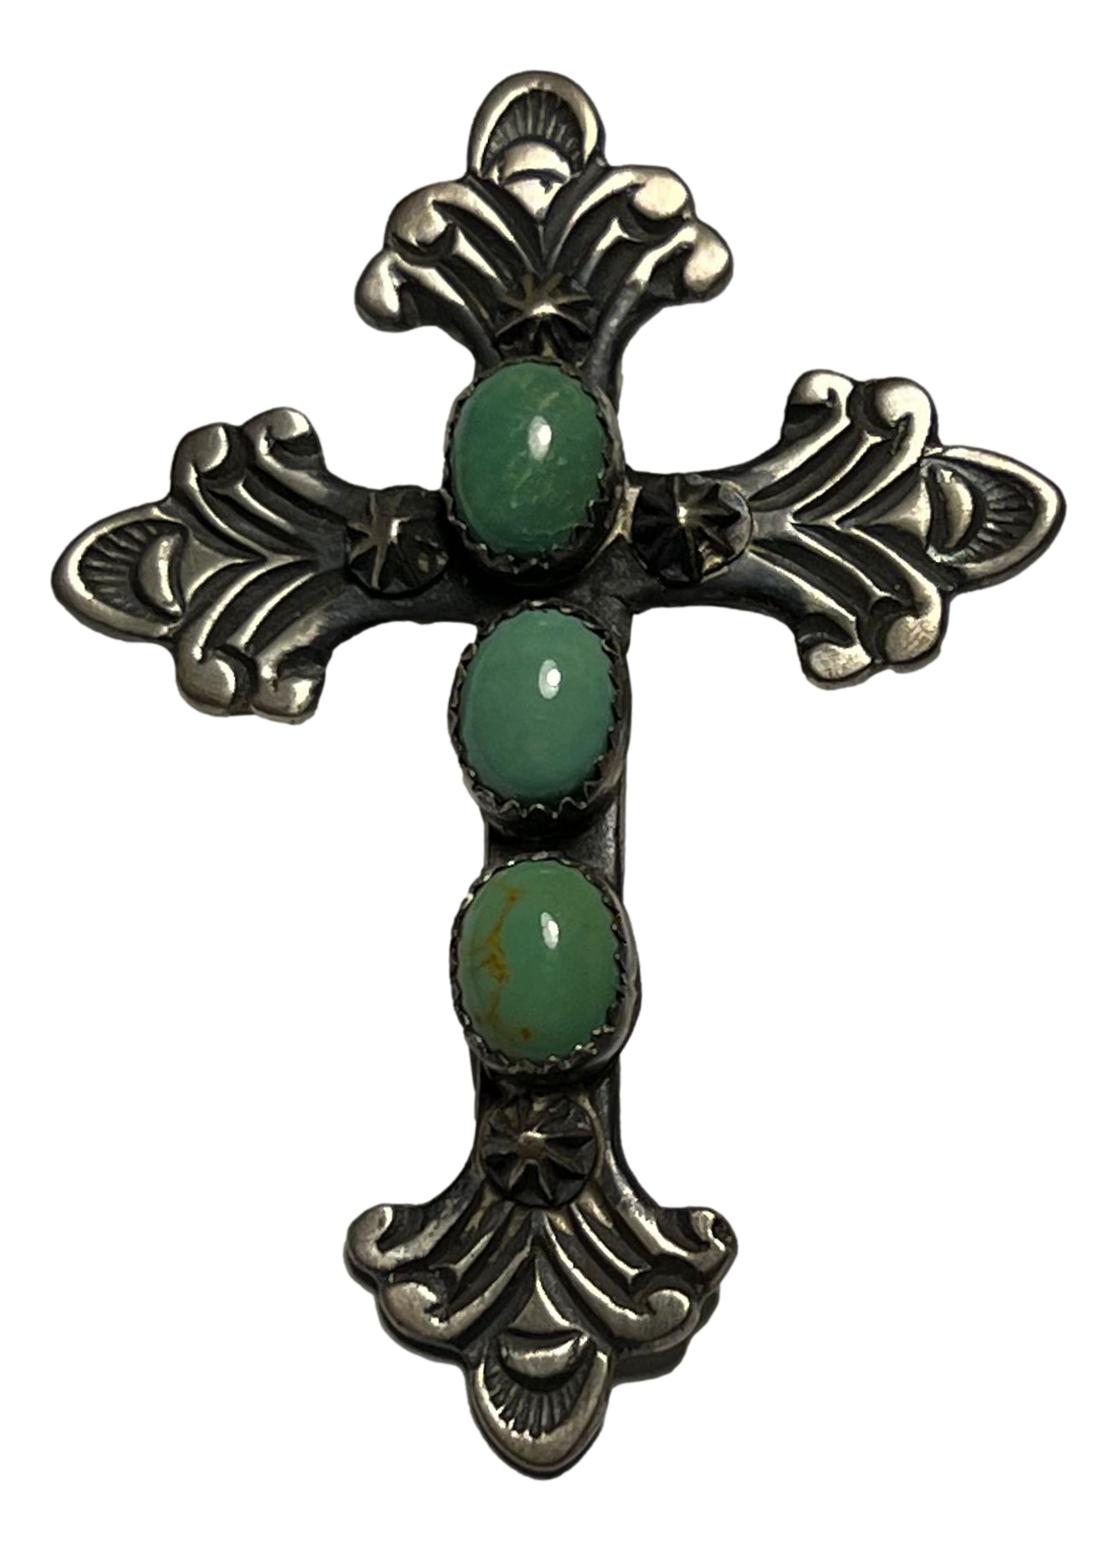 Pendant Cross Sterling Silver Handcrafted Skilled Native American Artisans 2.25 H Inch Stamped Le Fleur Design 3 Large Oval Green Turquoise Center - Ysleta Mission Gift Shop- VOTED El Paso's Best Gift Shop